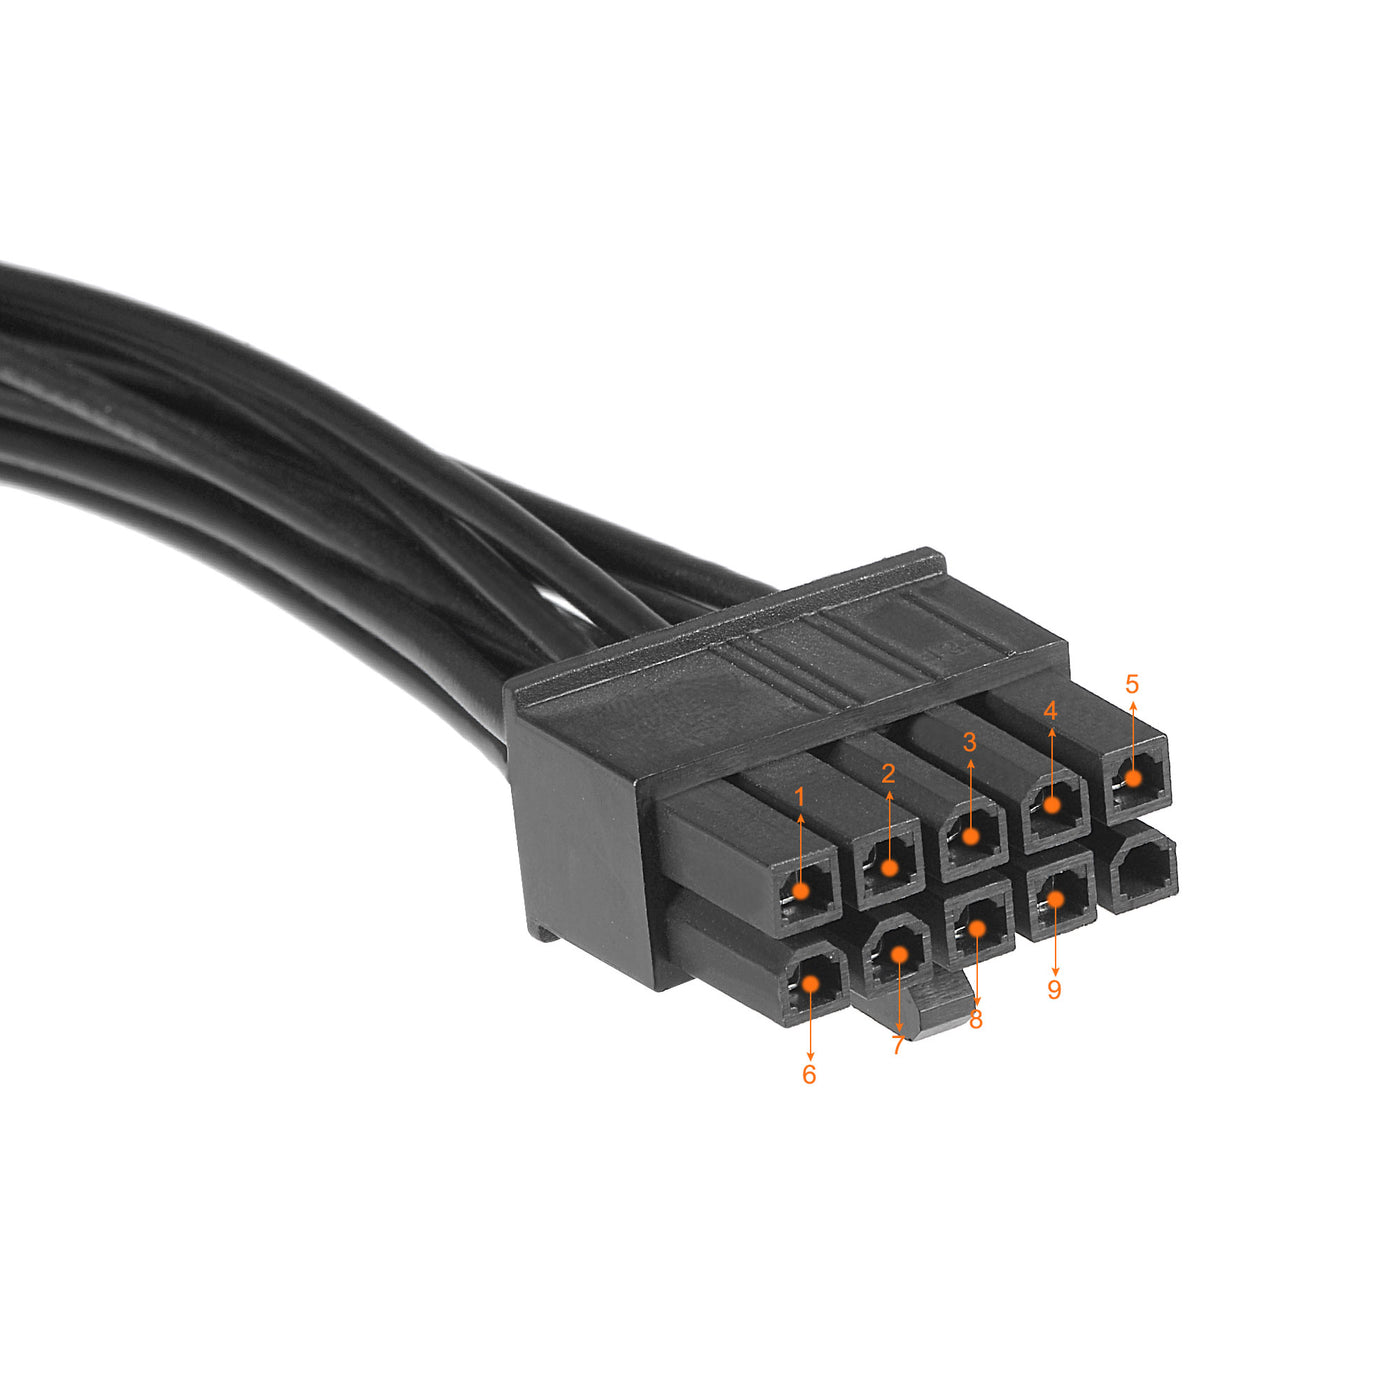 uxcell Uxcell 24 to 10 Pin Mainboard Power Cable for Modular Board 18 AWG 21cm